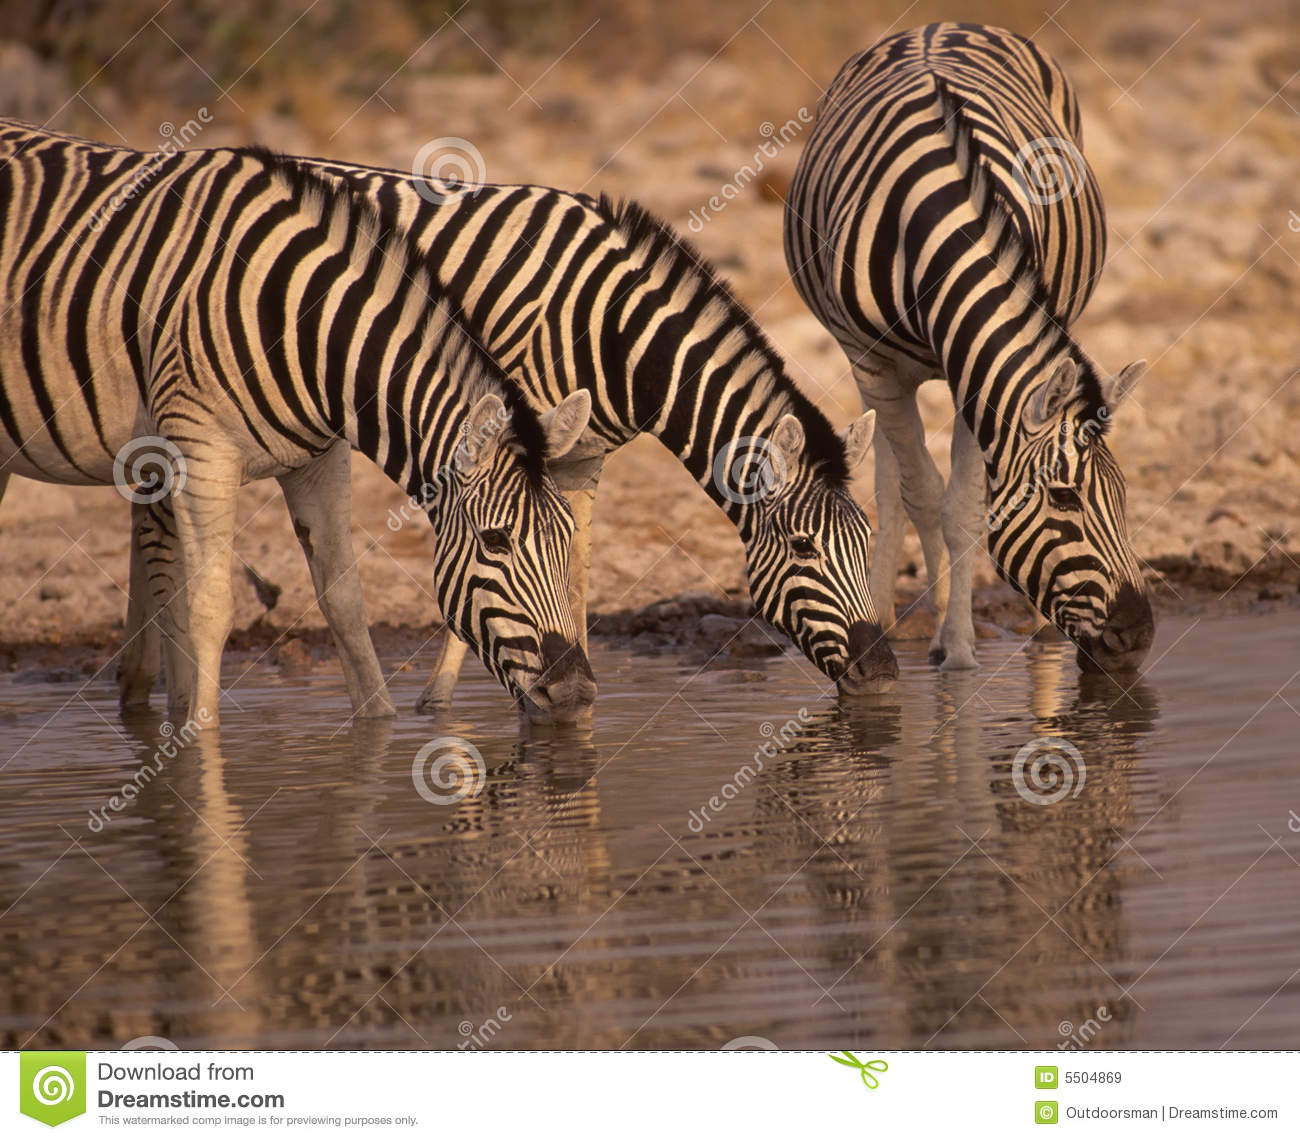 Gevry S Zebra At A Waterhole  Photographed In Etosha National Park